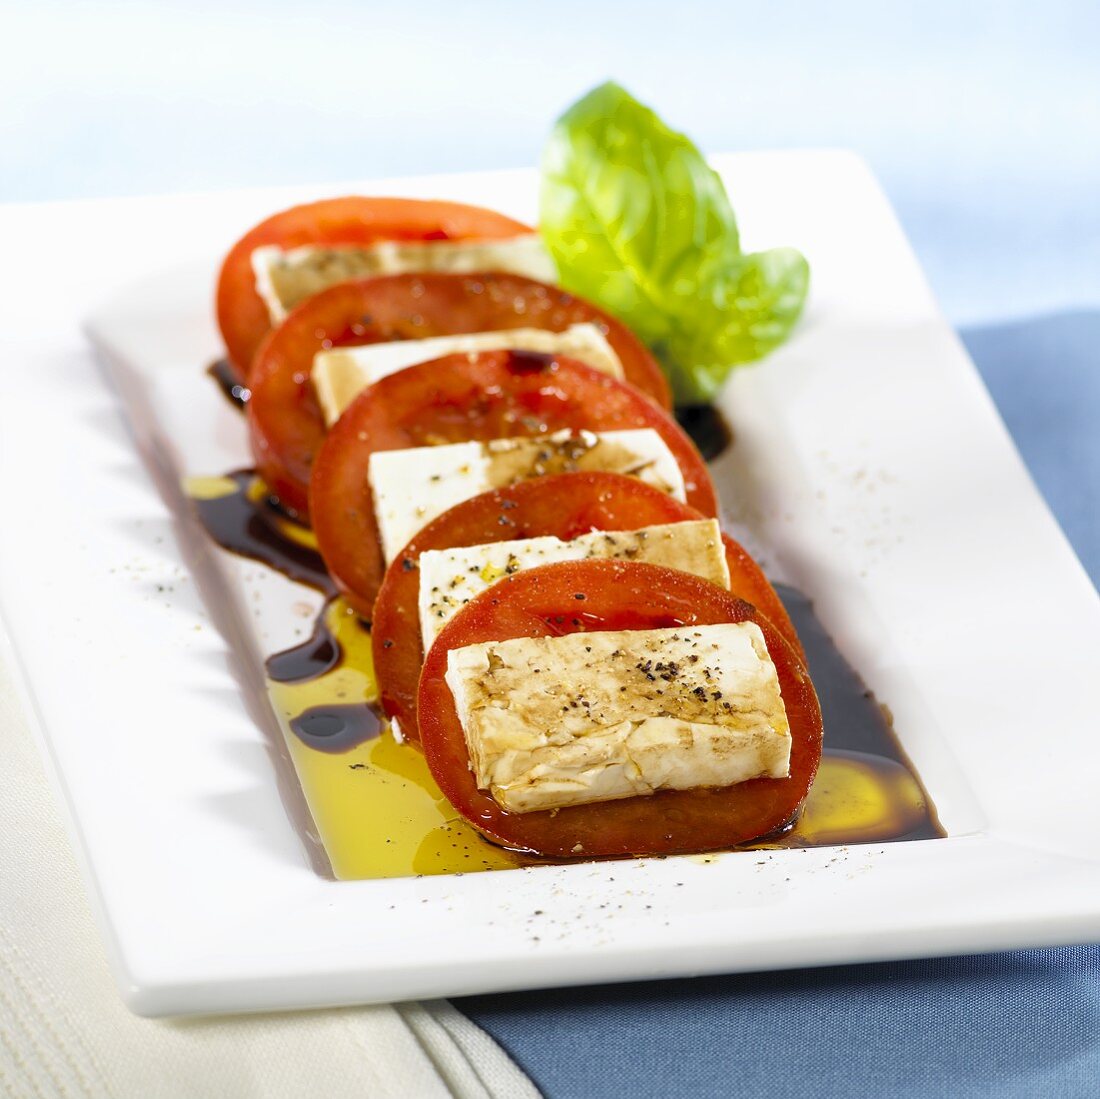 Tomato slices with sheep's cheese